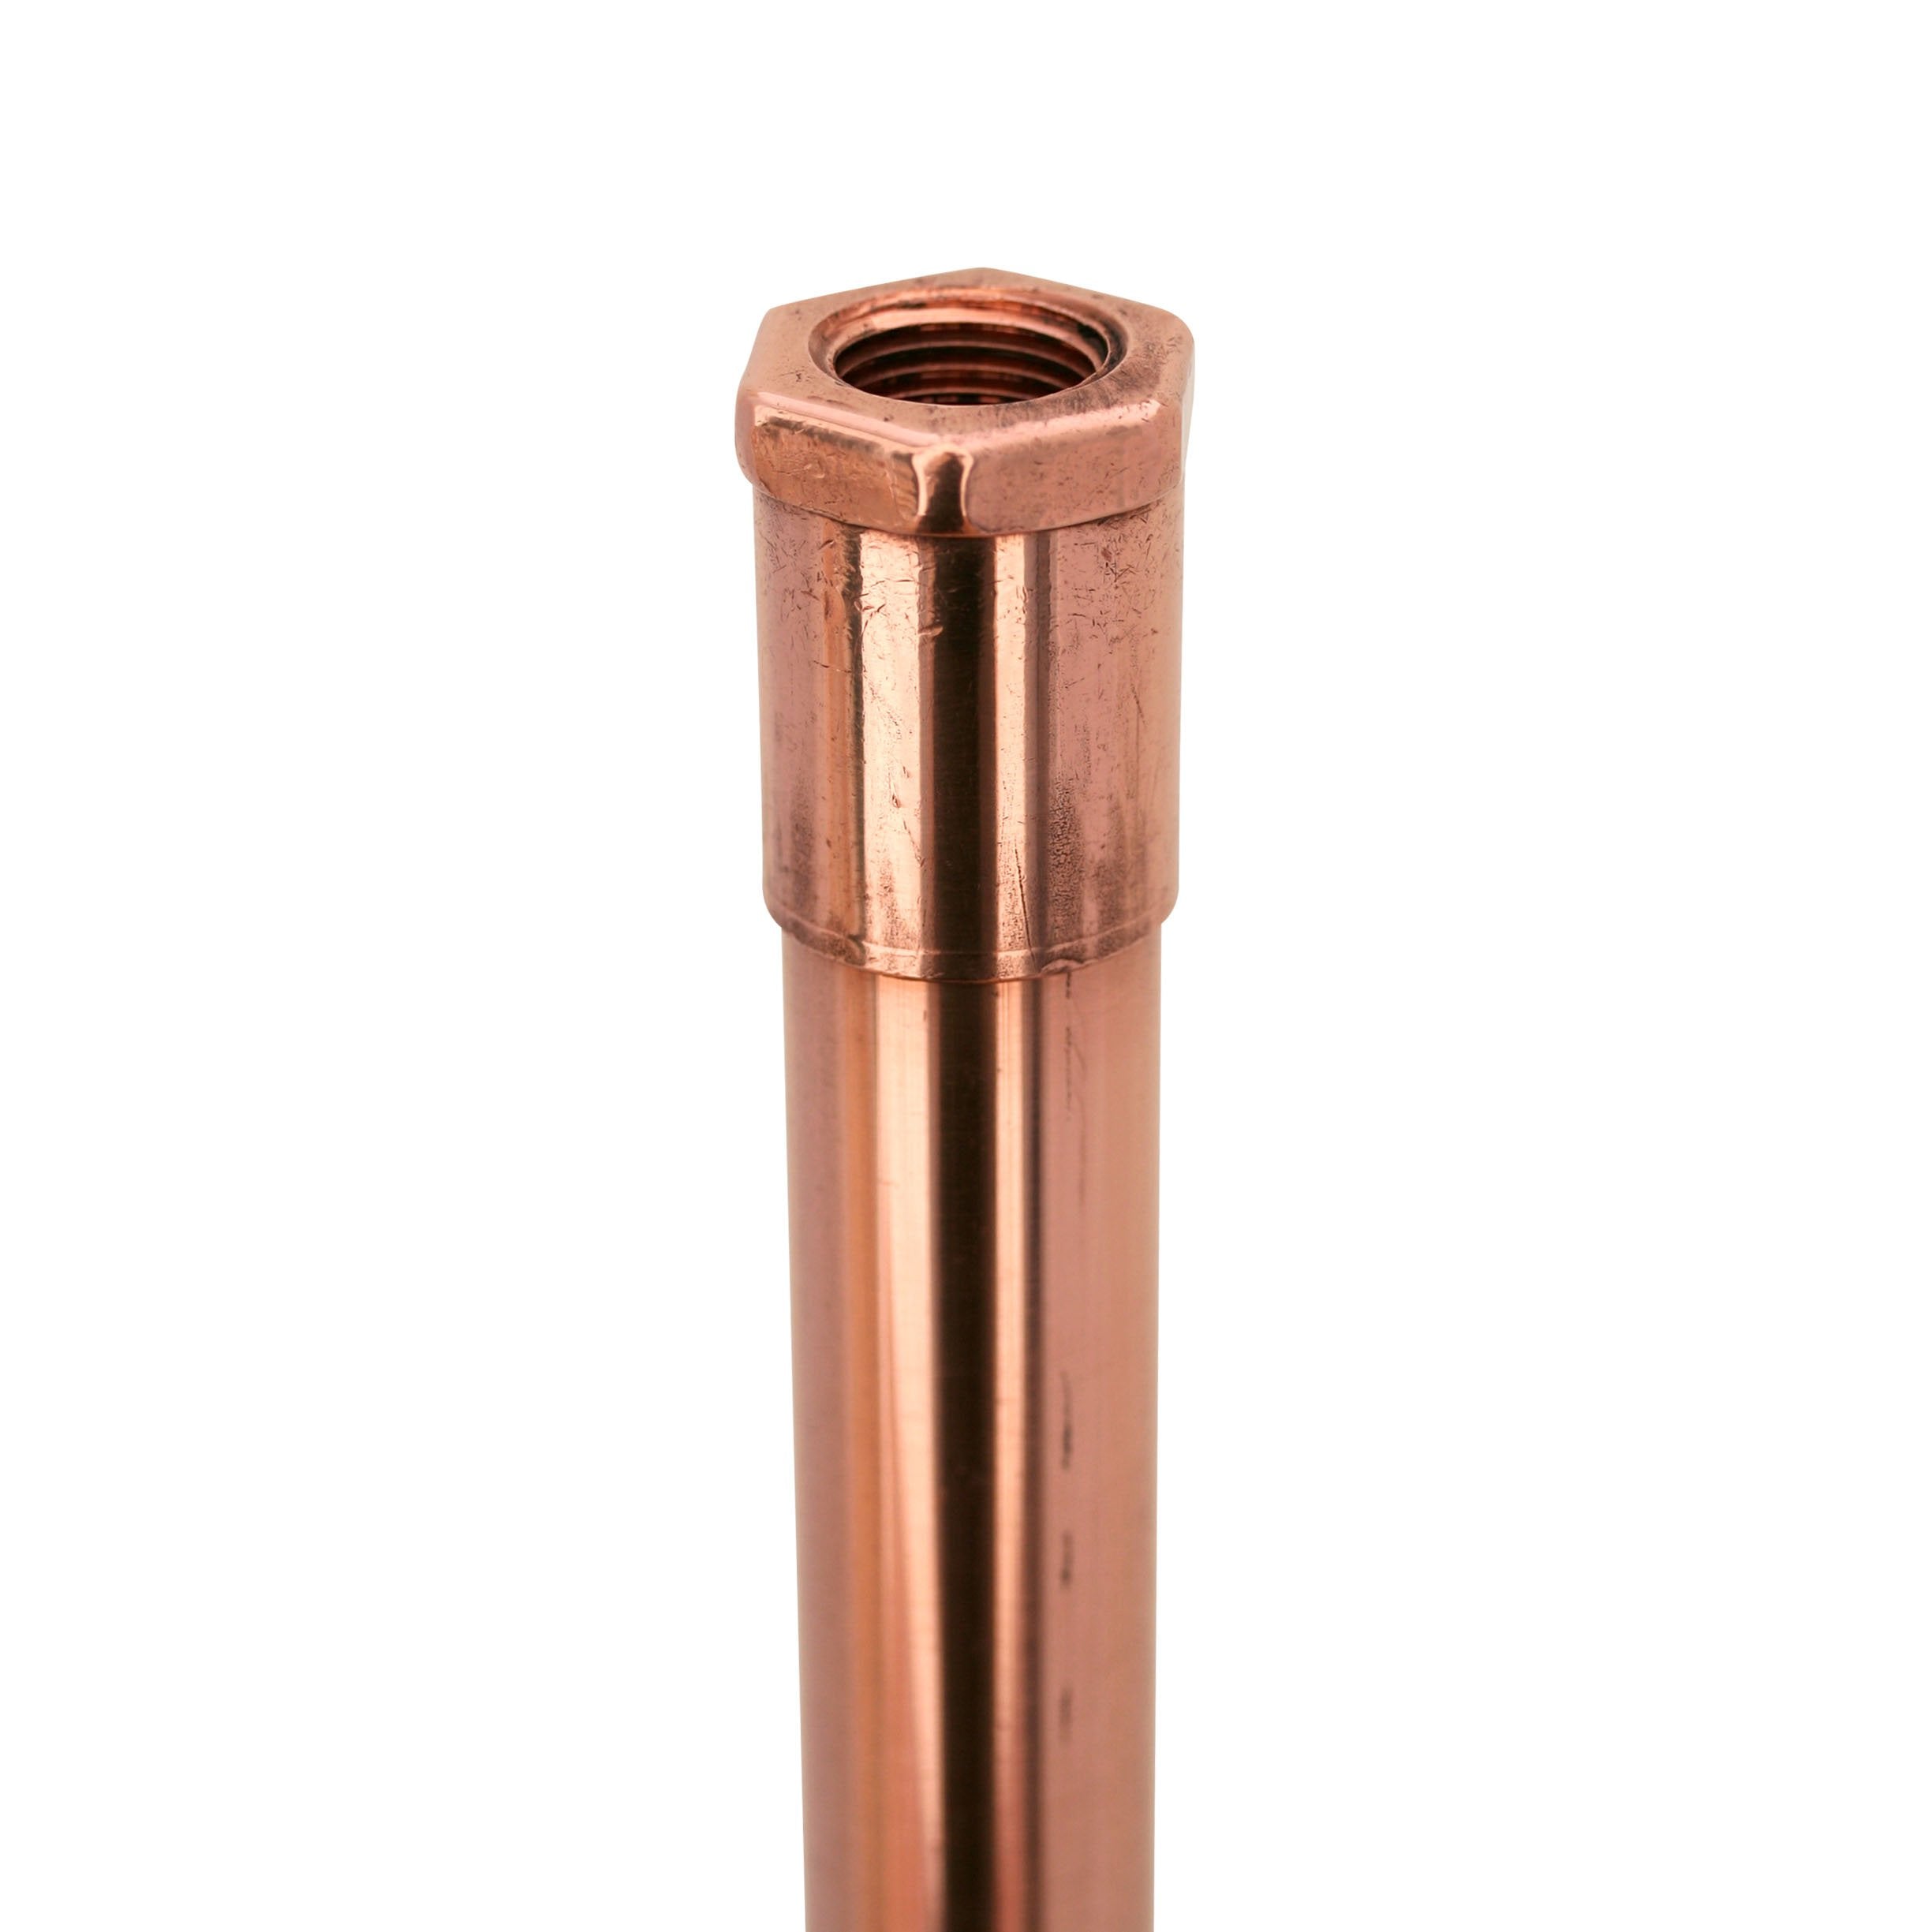 CopperMoon Custom Copper Stem ONLY for CM.4012 path light